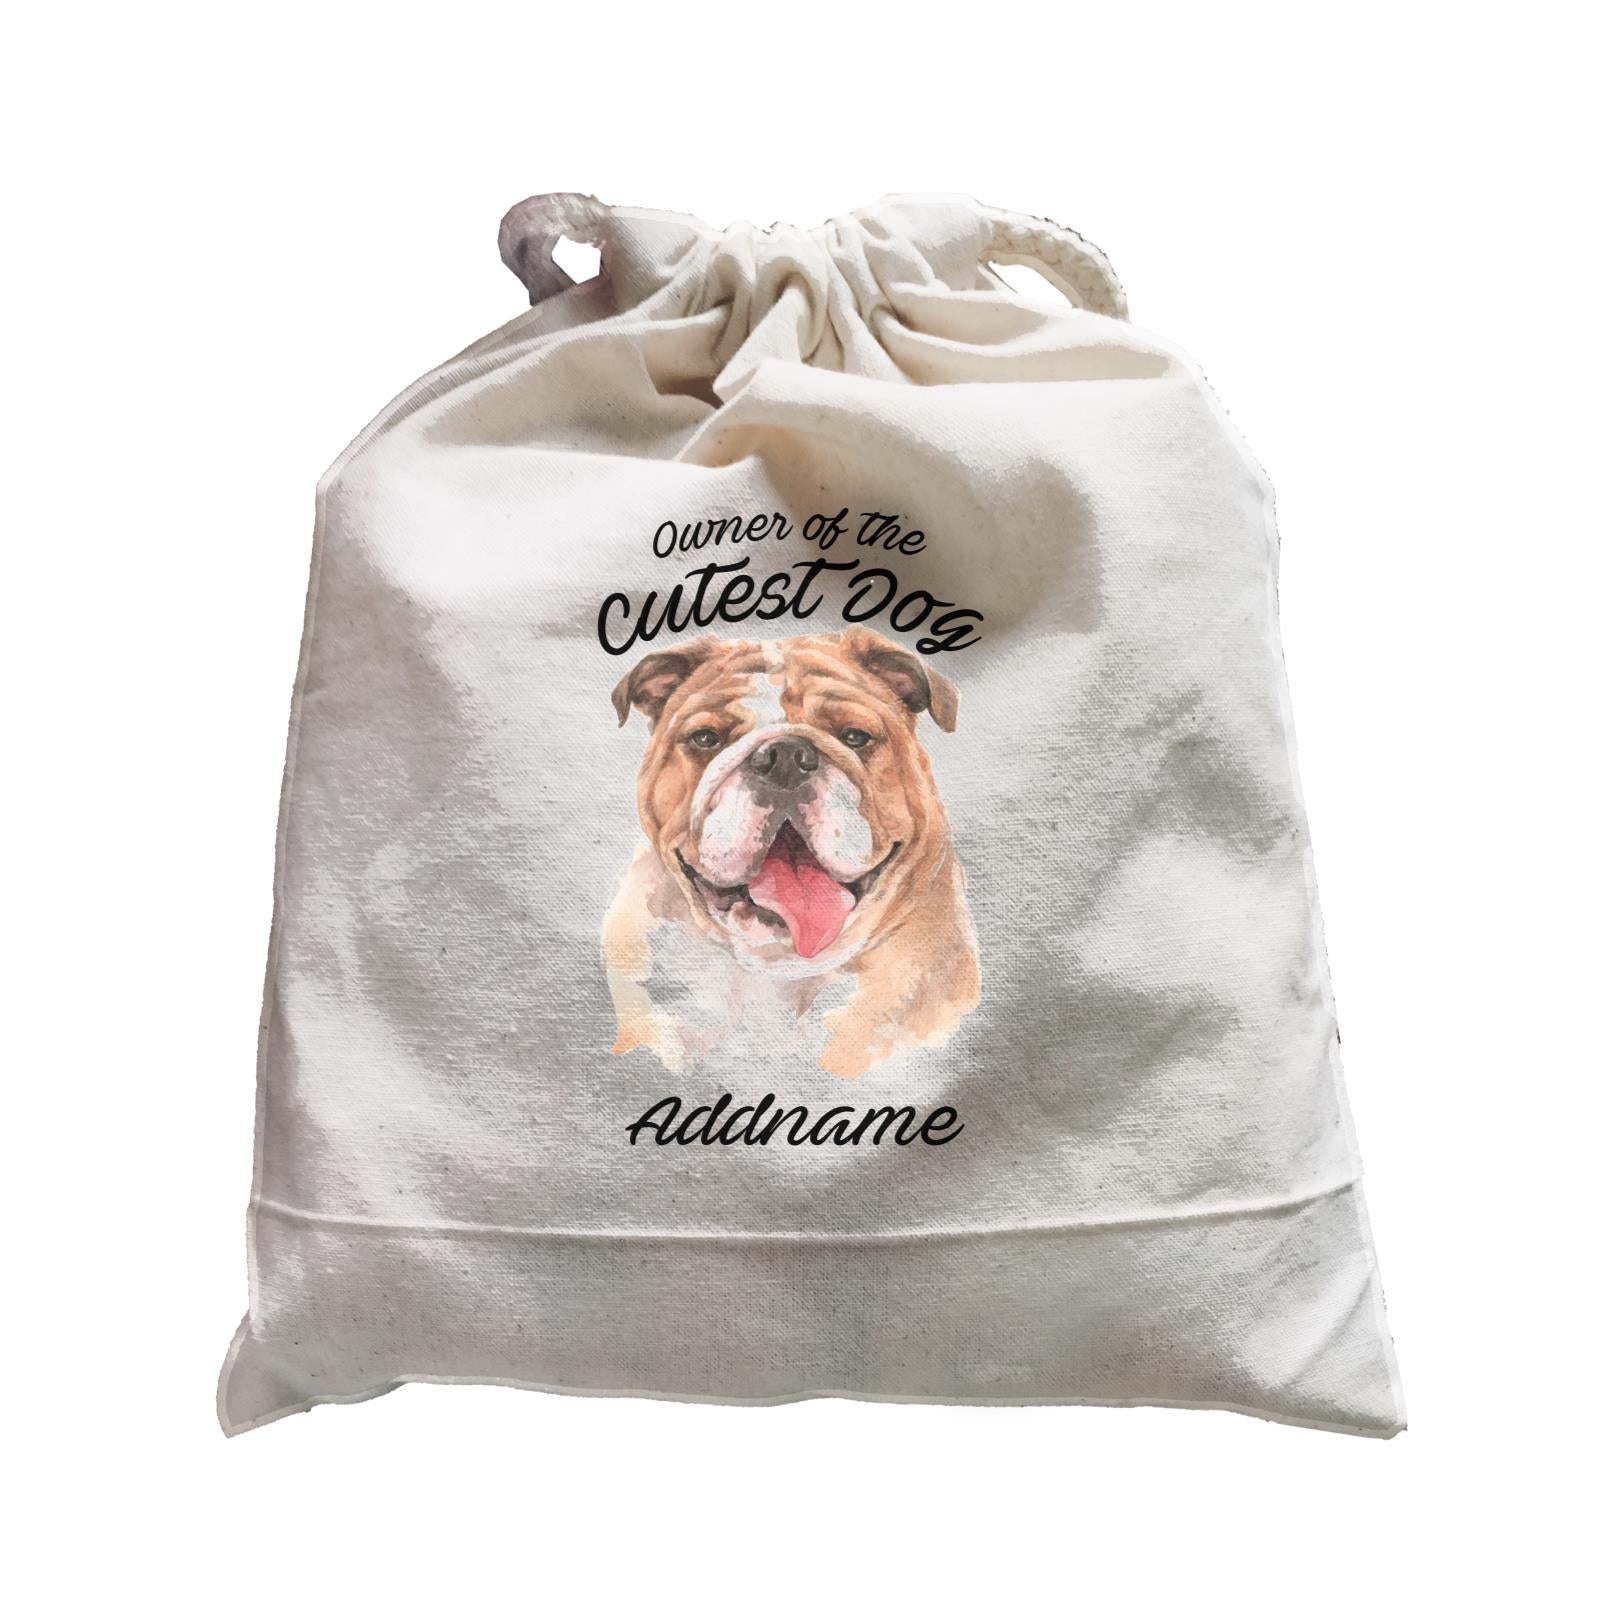 Watercolor Dog Owner Of The Cutest Dog Bulldog Addname Satchel